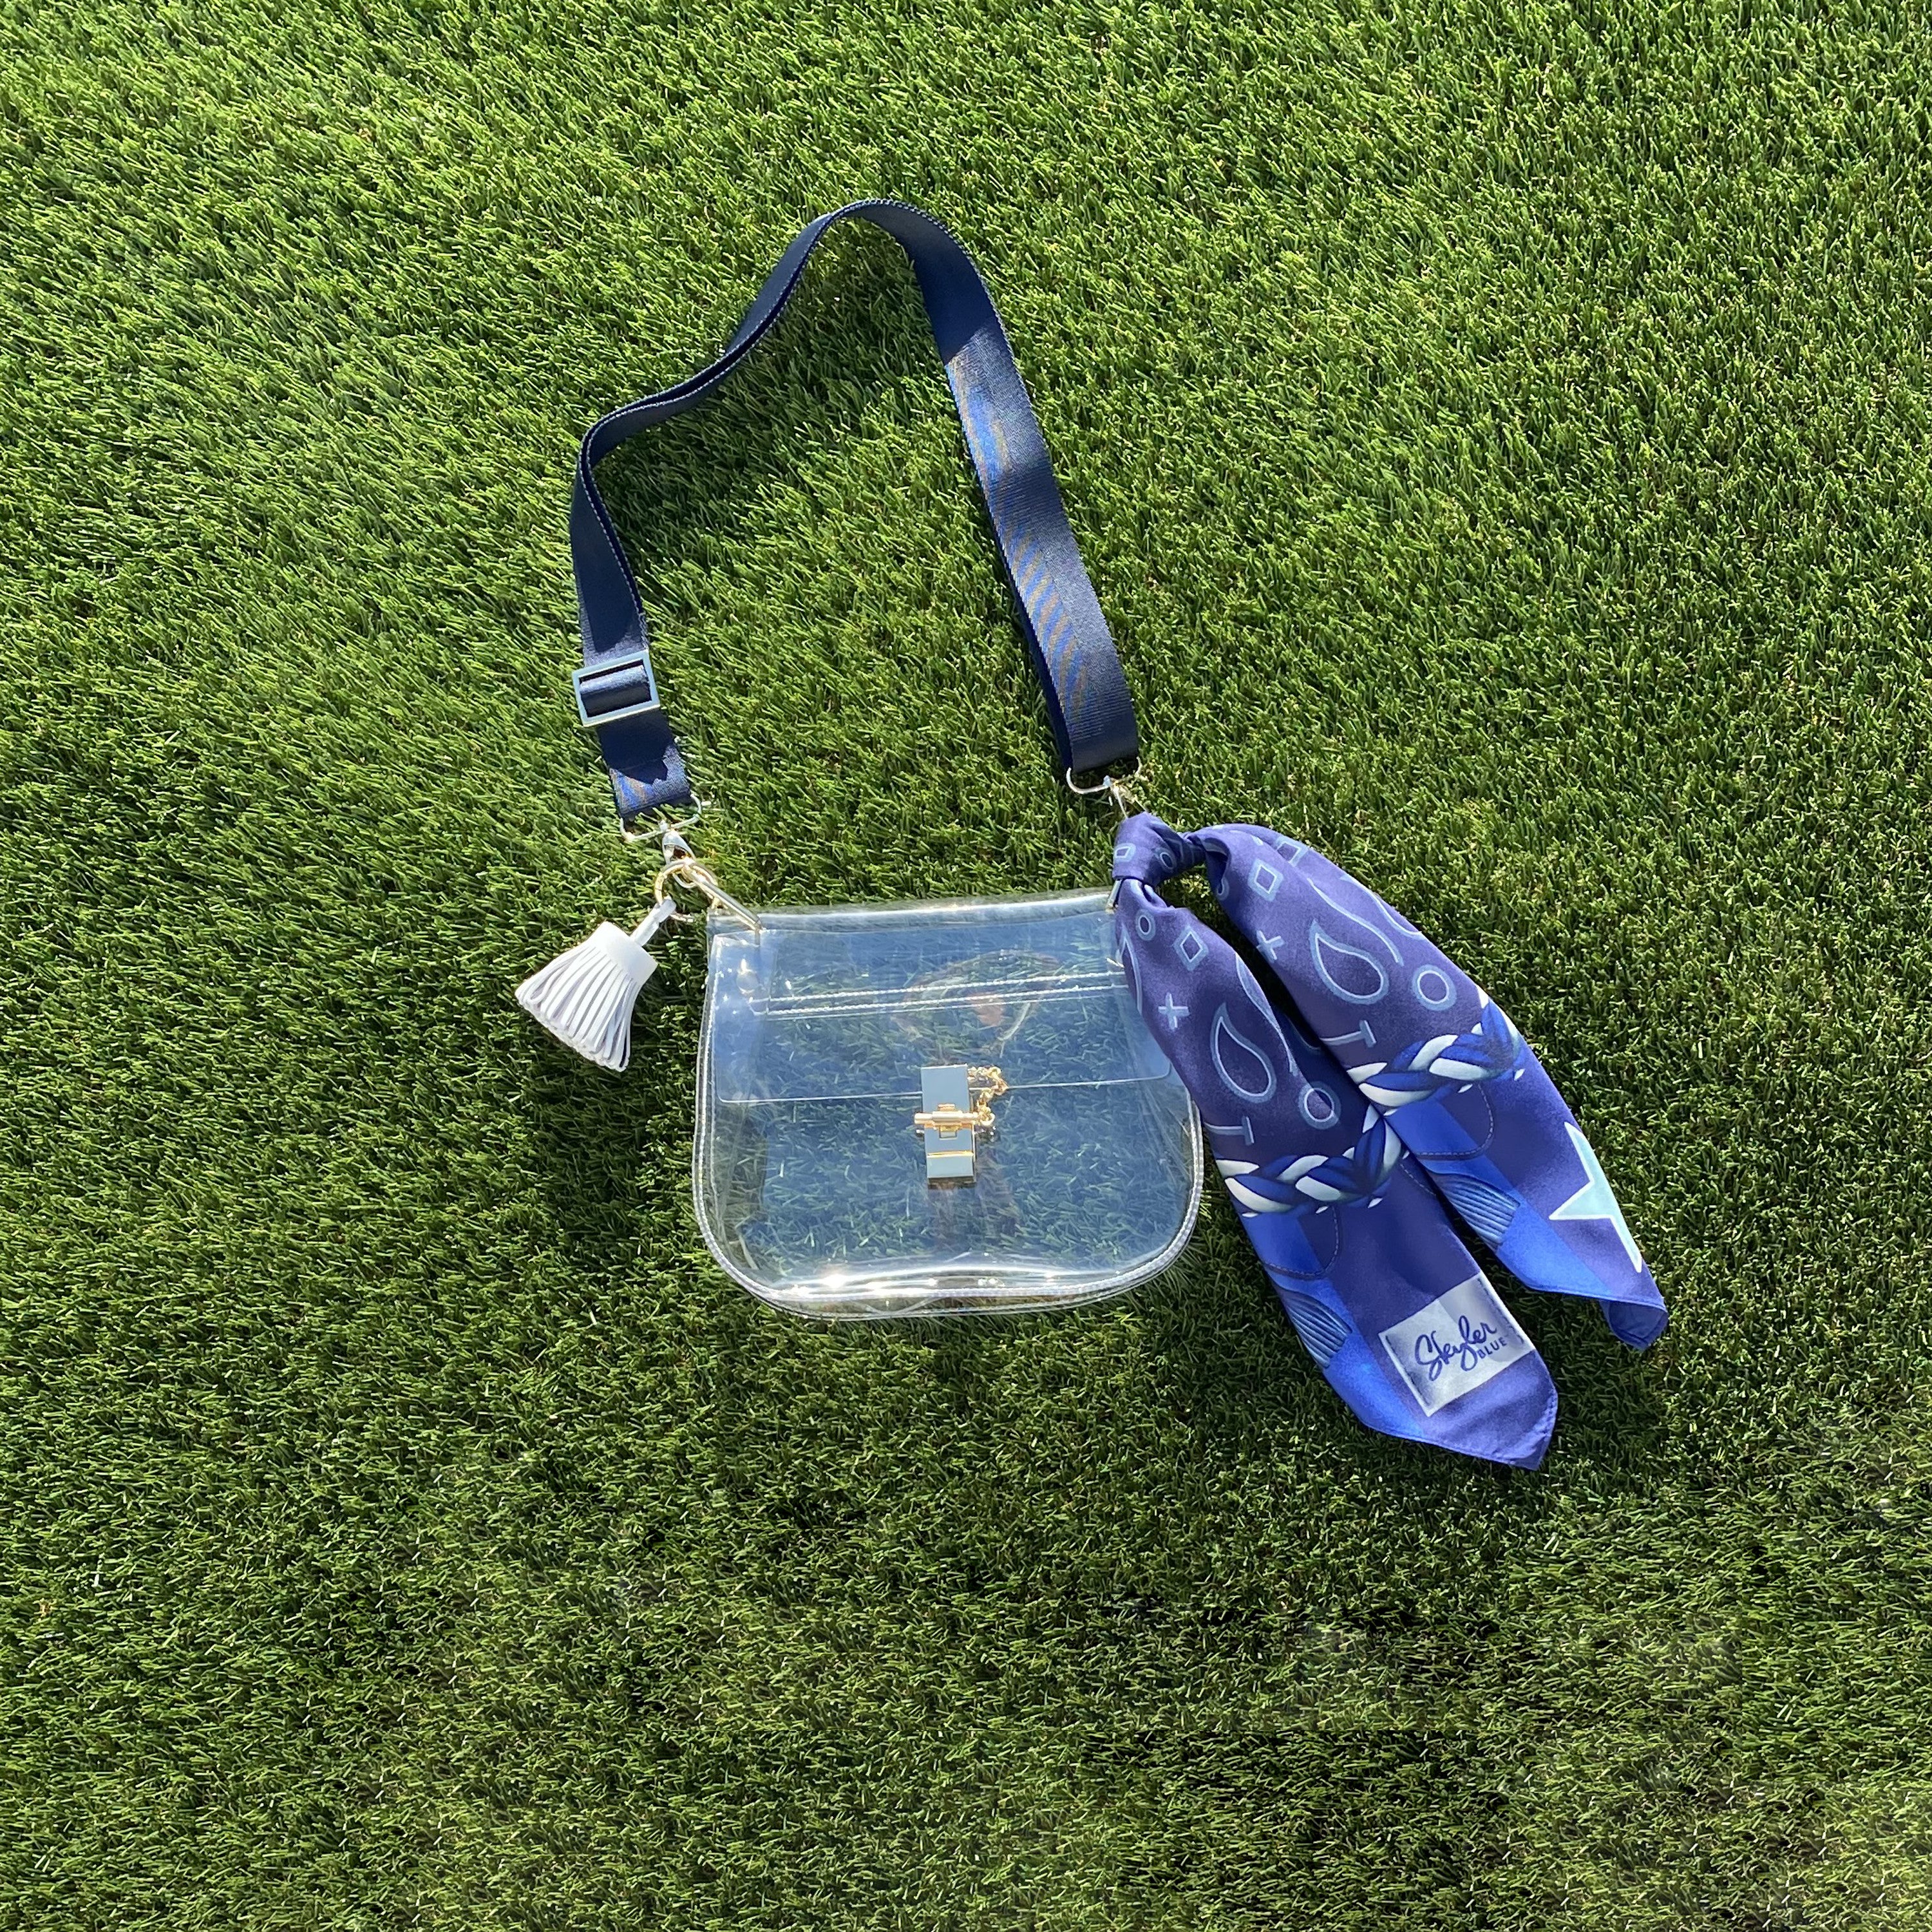 Skyler Blue’s The Dallas 001 Medium Saddle Clear Bag stadium approved clear bag / clear purse including adjustable, nylon webbing shoulder or crossbody strap with herringbone weave and gold hardware, 60-centimeter 100% silk twill scarf, and 100% genuine leather tassel. 